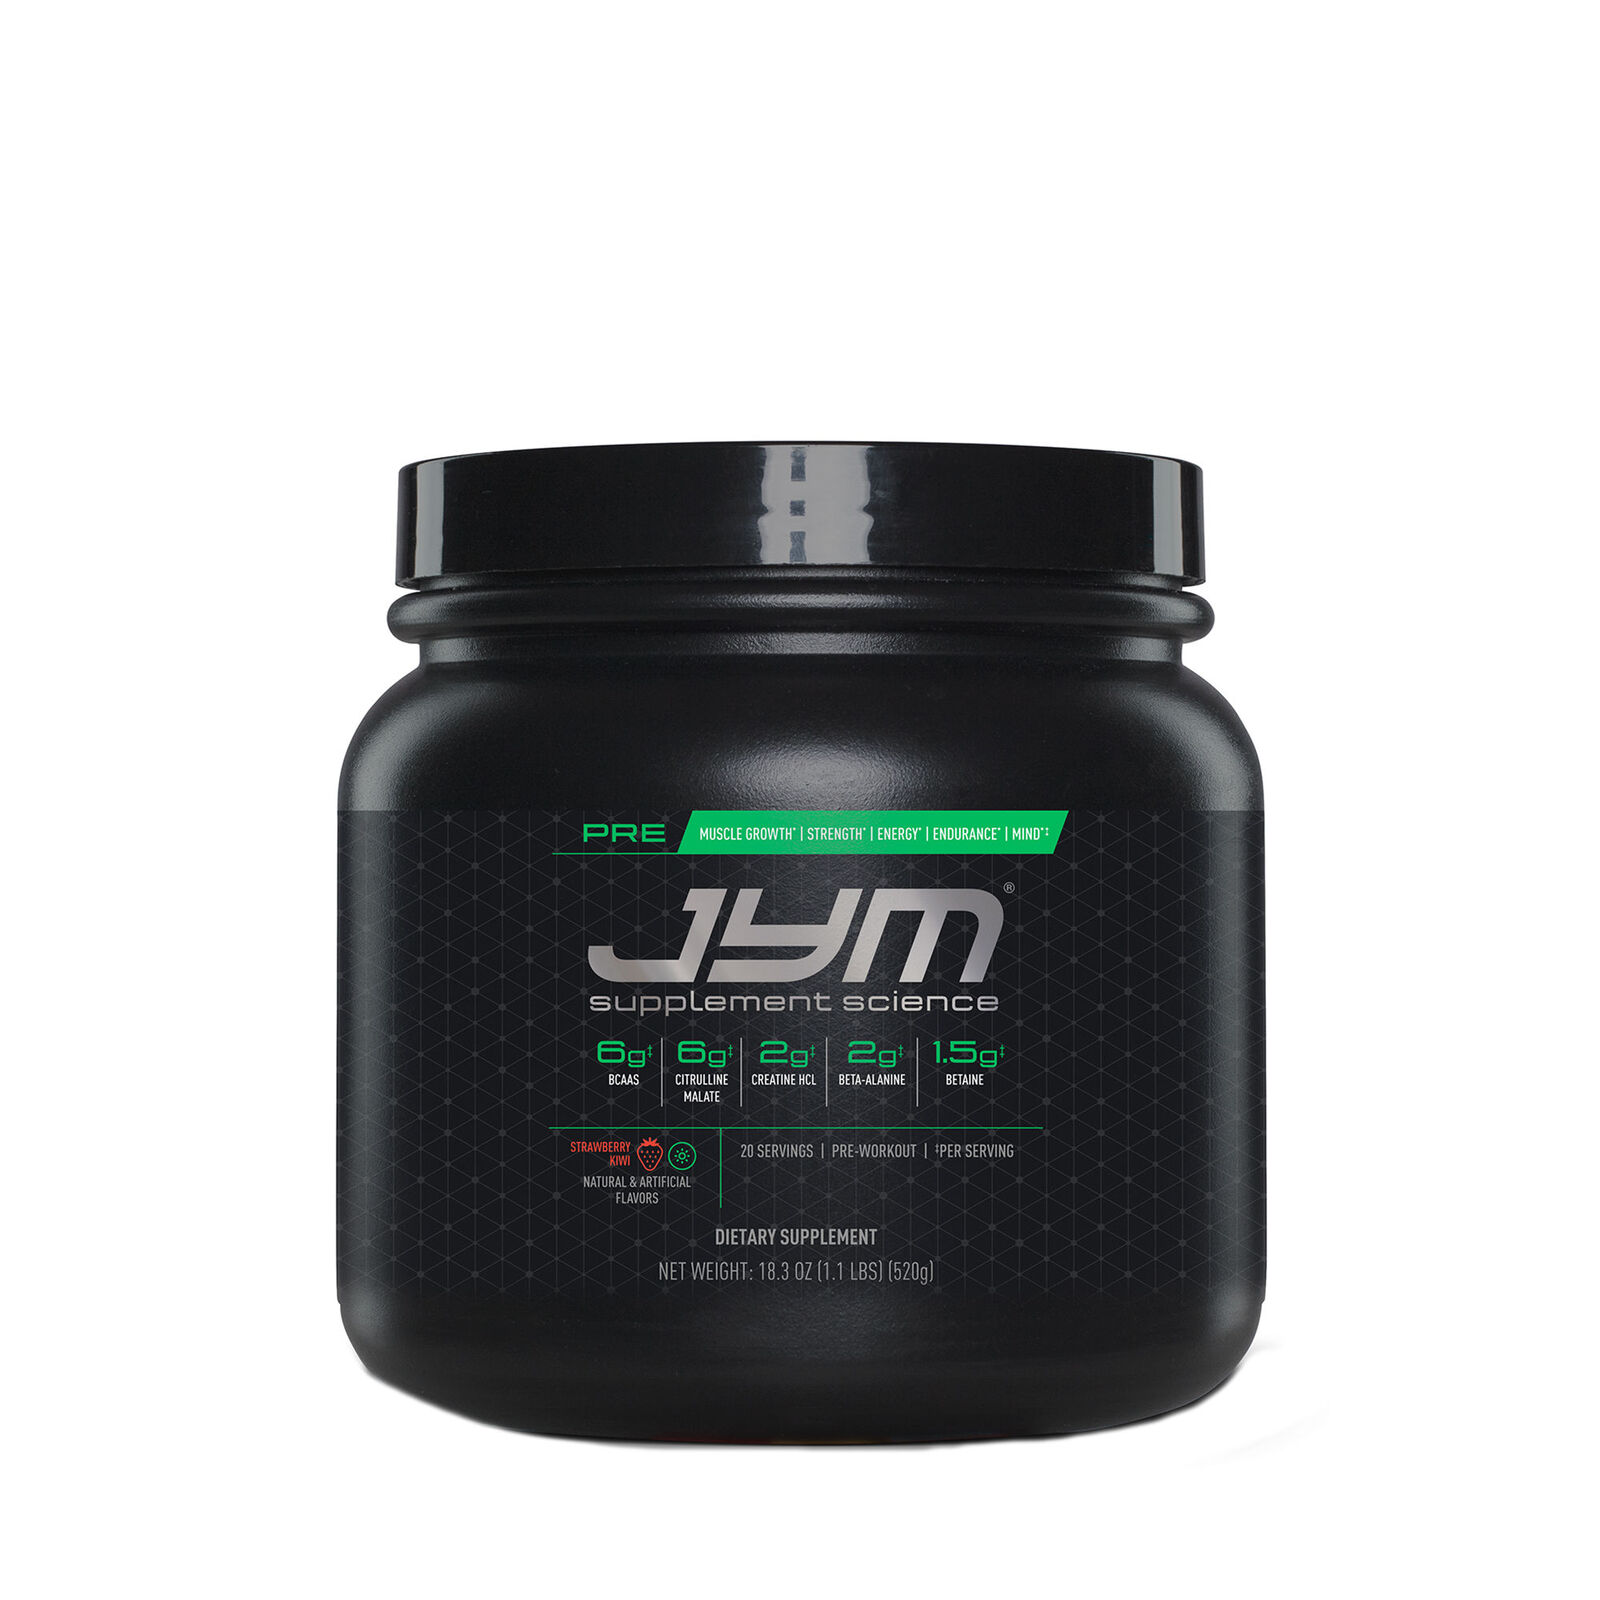  Jym Post Workout Review for push your ABS